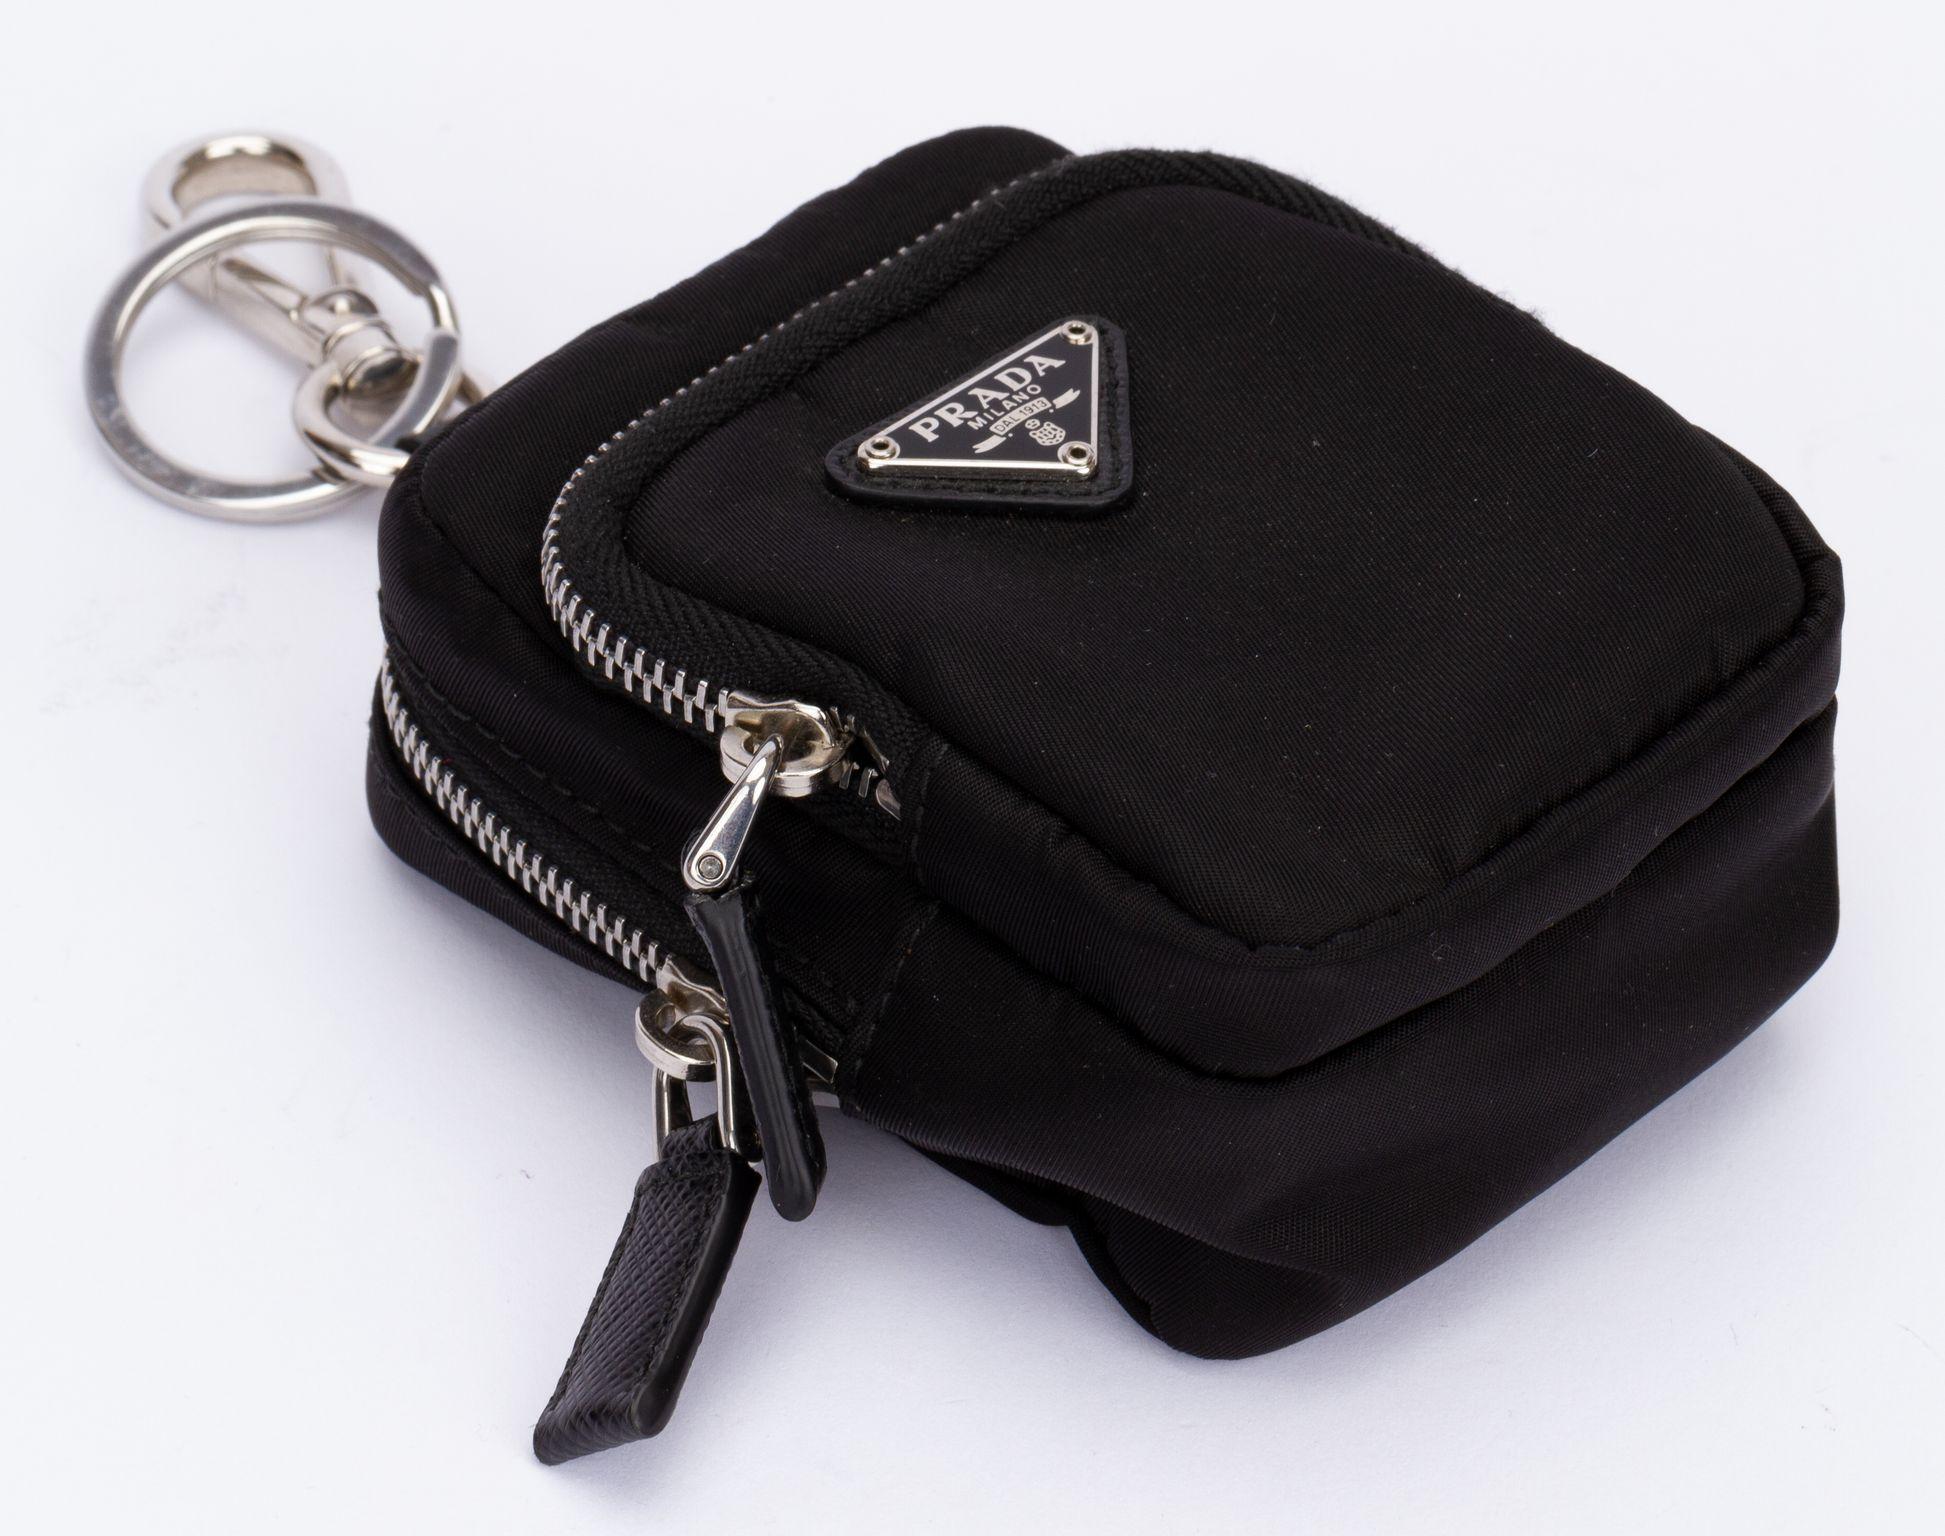 Prada Mini Pouch in black. The padded mini-pouch is made of Re-Nylon and from the latest Prada collection. It comes with a ring and a clip. It has two zipped compartments. On the front is a plate with the Prada logo on it.